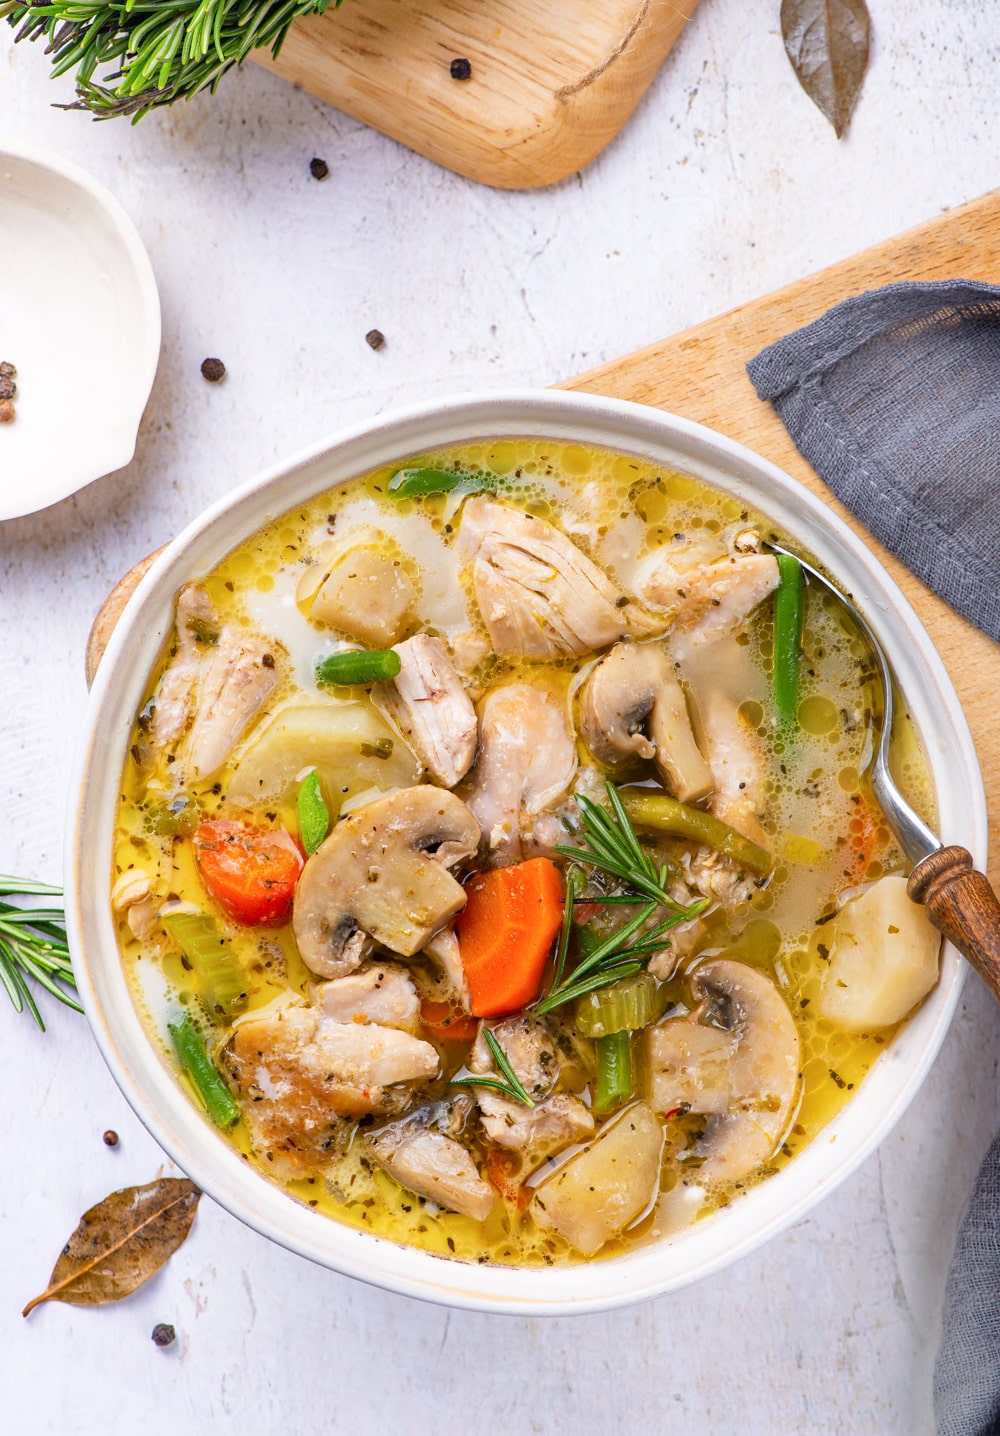 Chicken stew in a white bowl, with a spoon about to scoop some out.